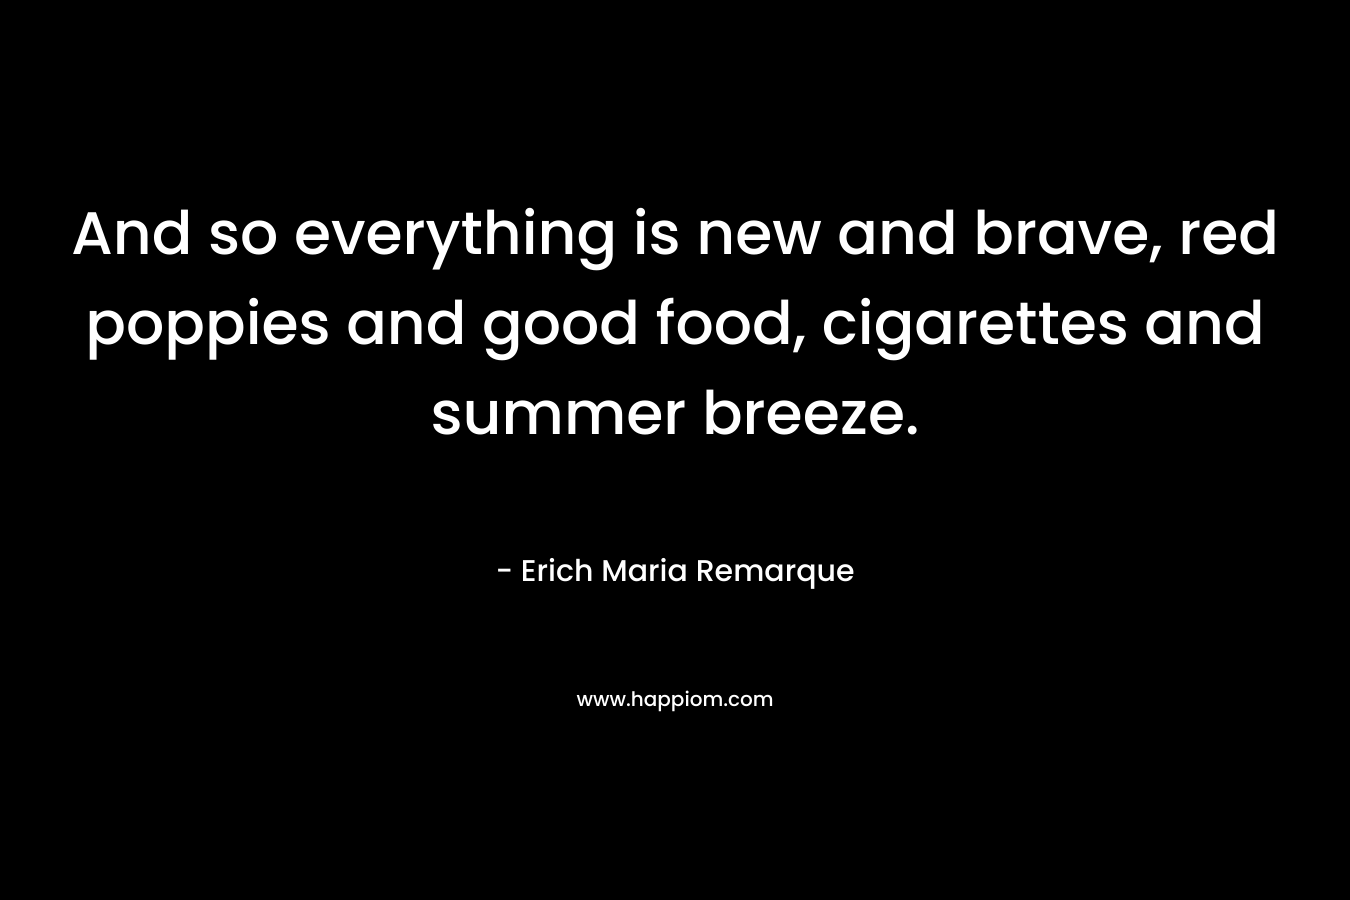 And so everything is new and brave, red poppies and good food, cigarettes and summer breeze. – Erich Maria Remarque